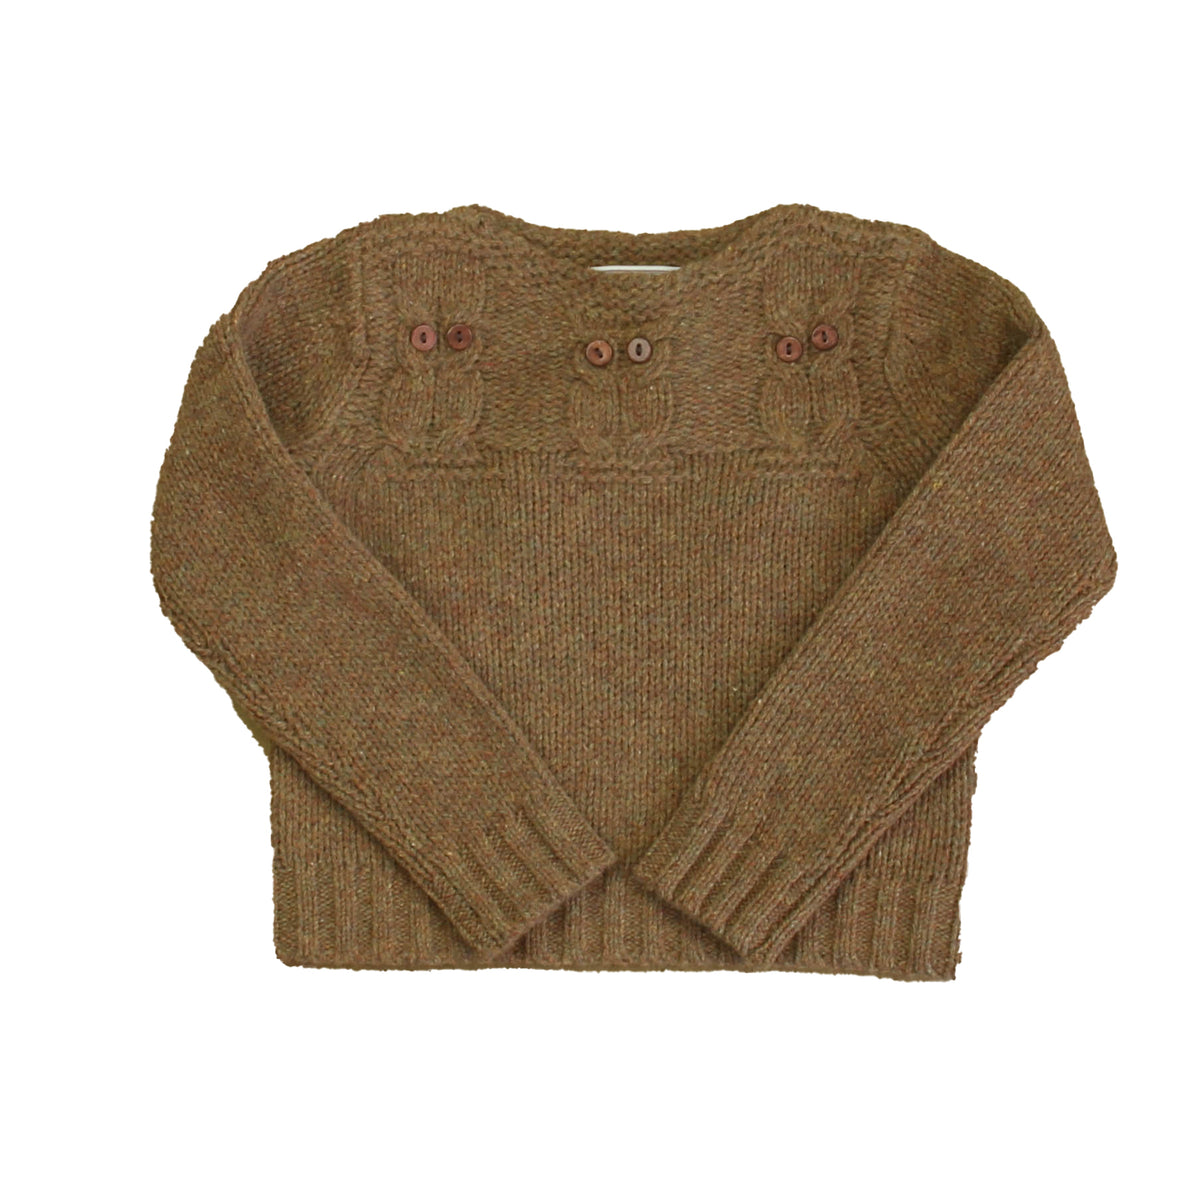 New with Tags: All Spice Sweater size: 2-5T -- FINAL SALE